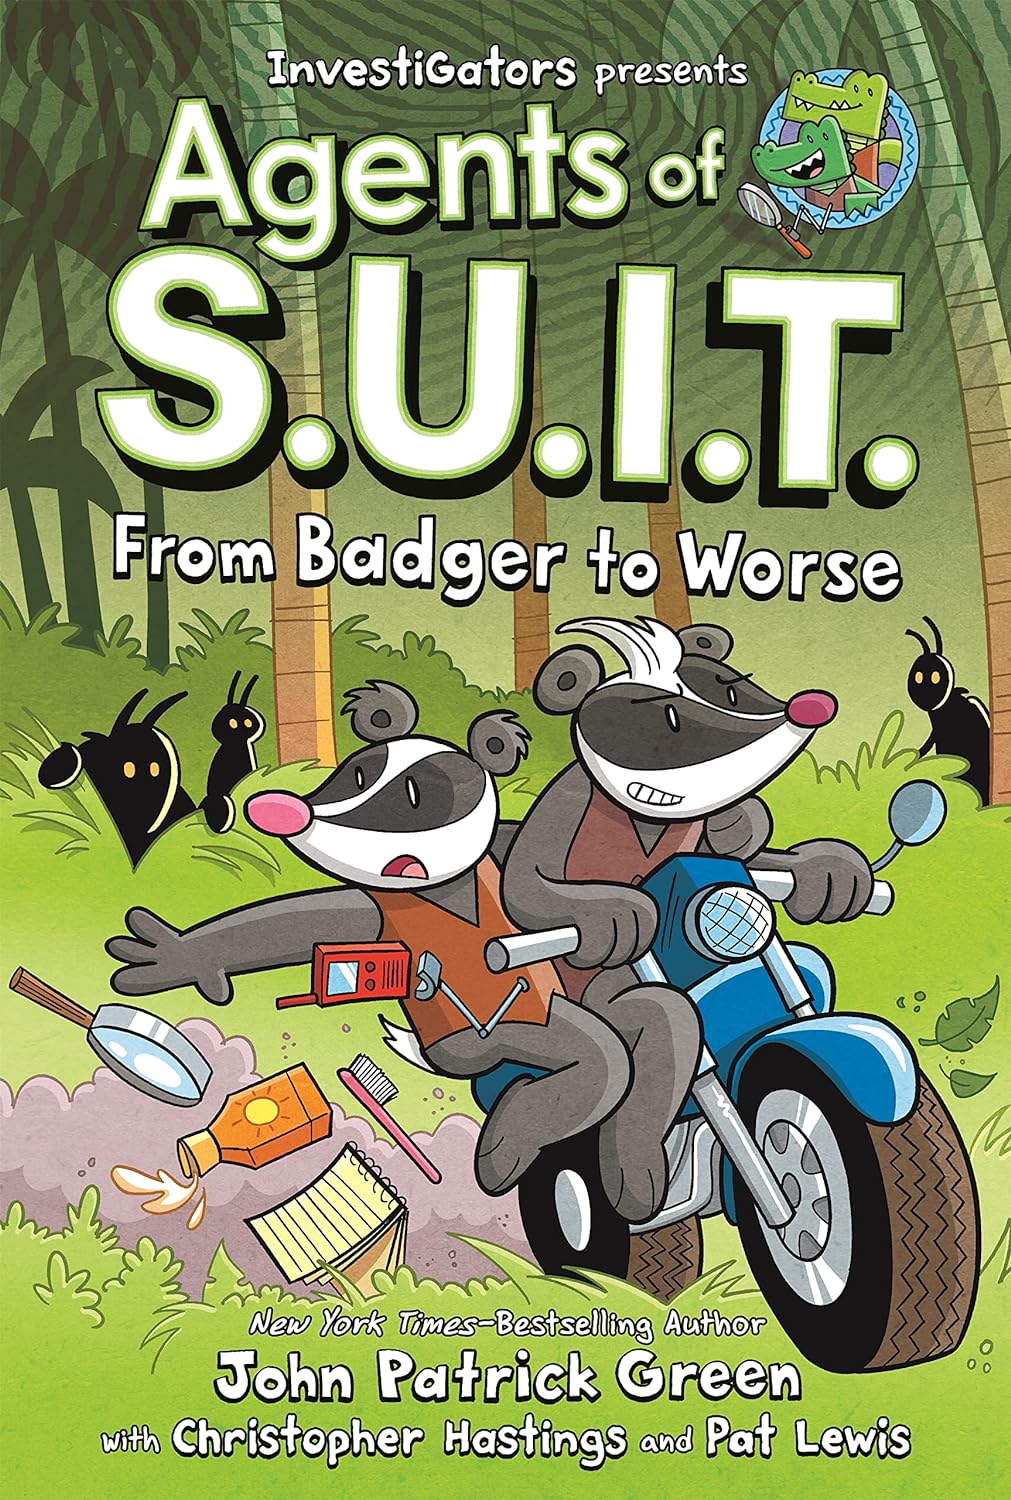 Book Cover Agents of S.U.I.T. From Badger to Worse, showing two badgers on a motorcycle, with the one on the rear dropping a walkie-talkie, magnifying glass, and other items. In the background, three dark silhouetted shapes peer out with yellow eyes from the bushes.